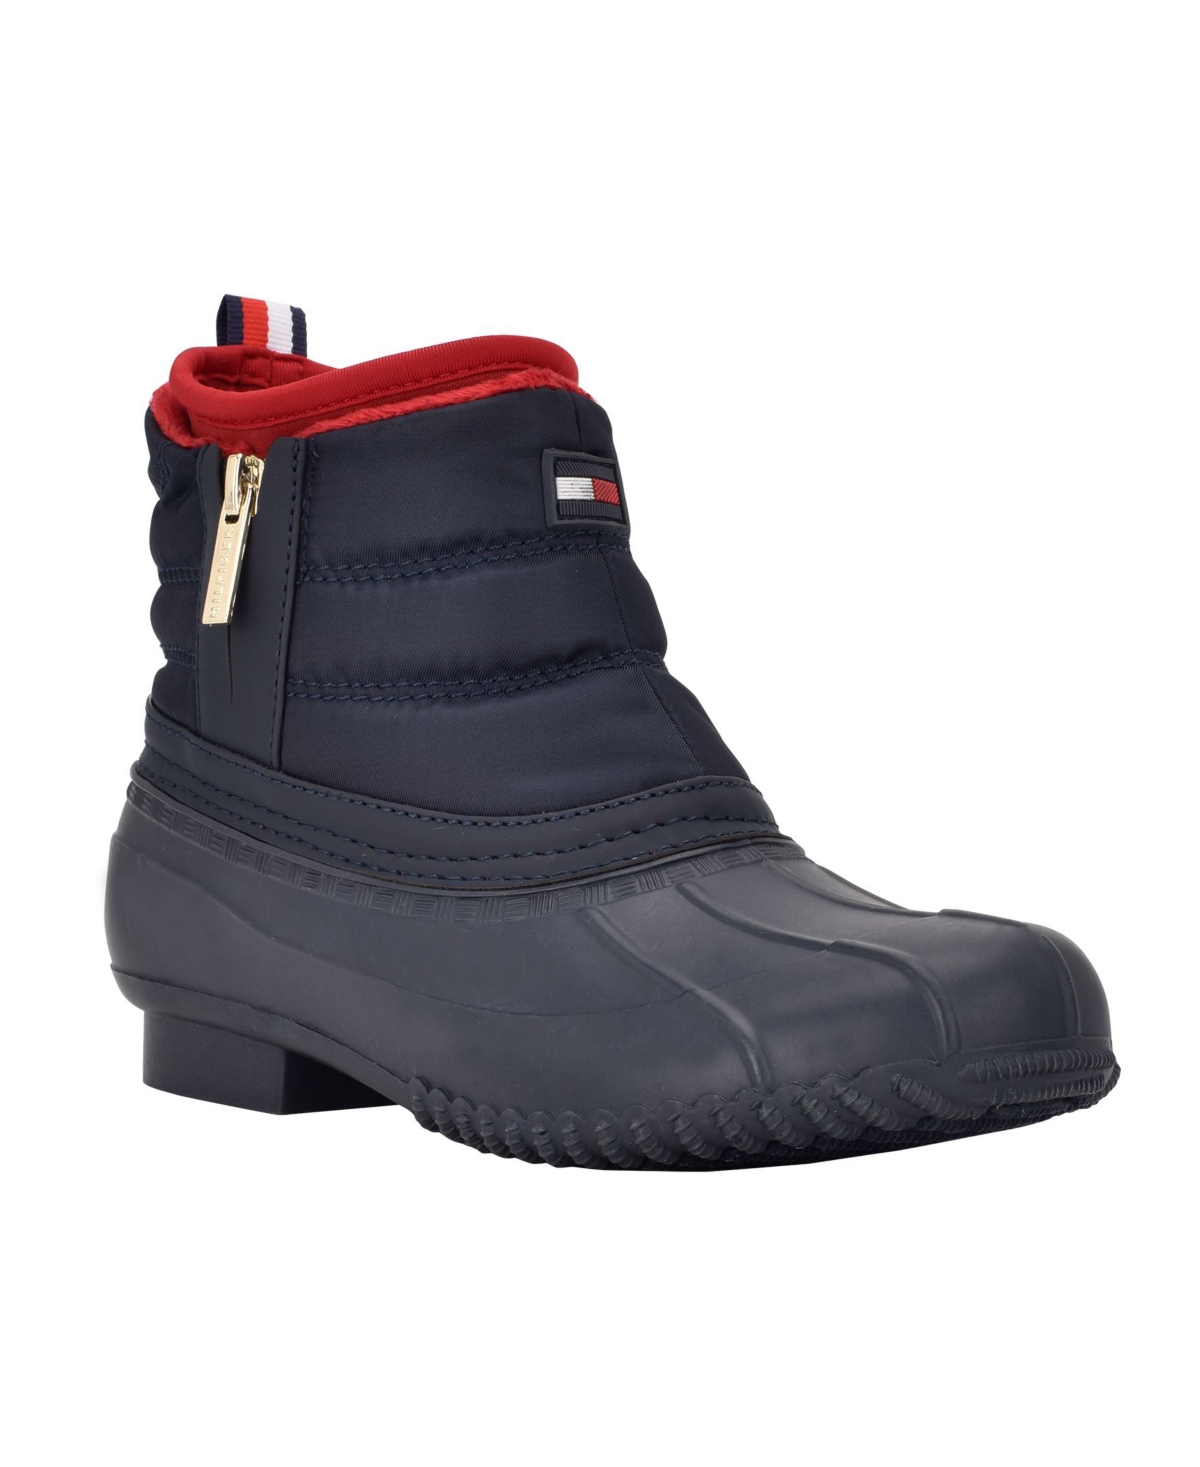 UPC 195972717916 product image for Tommy Hilfiger Women's Roana Zip Up Duck Booties Women's Shoes | upcitemdb.com